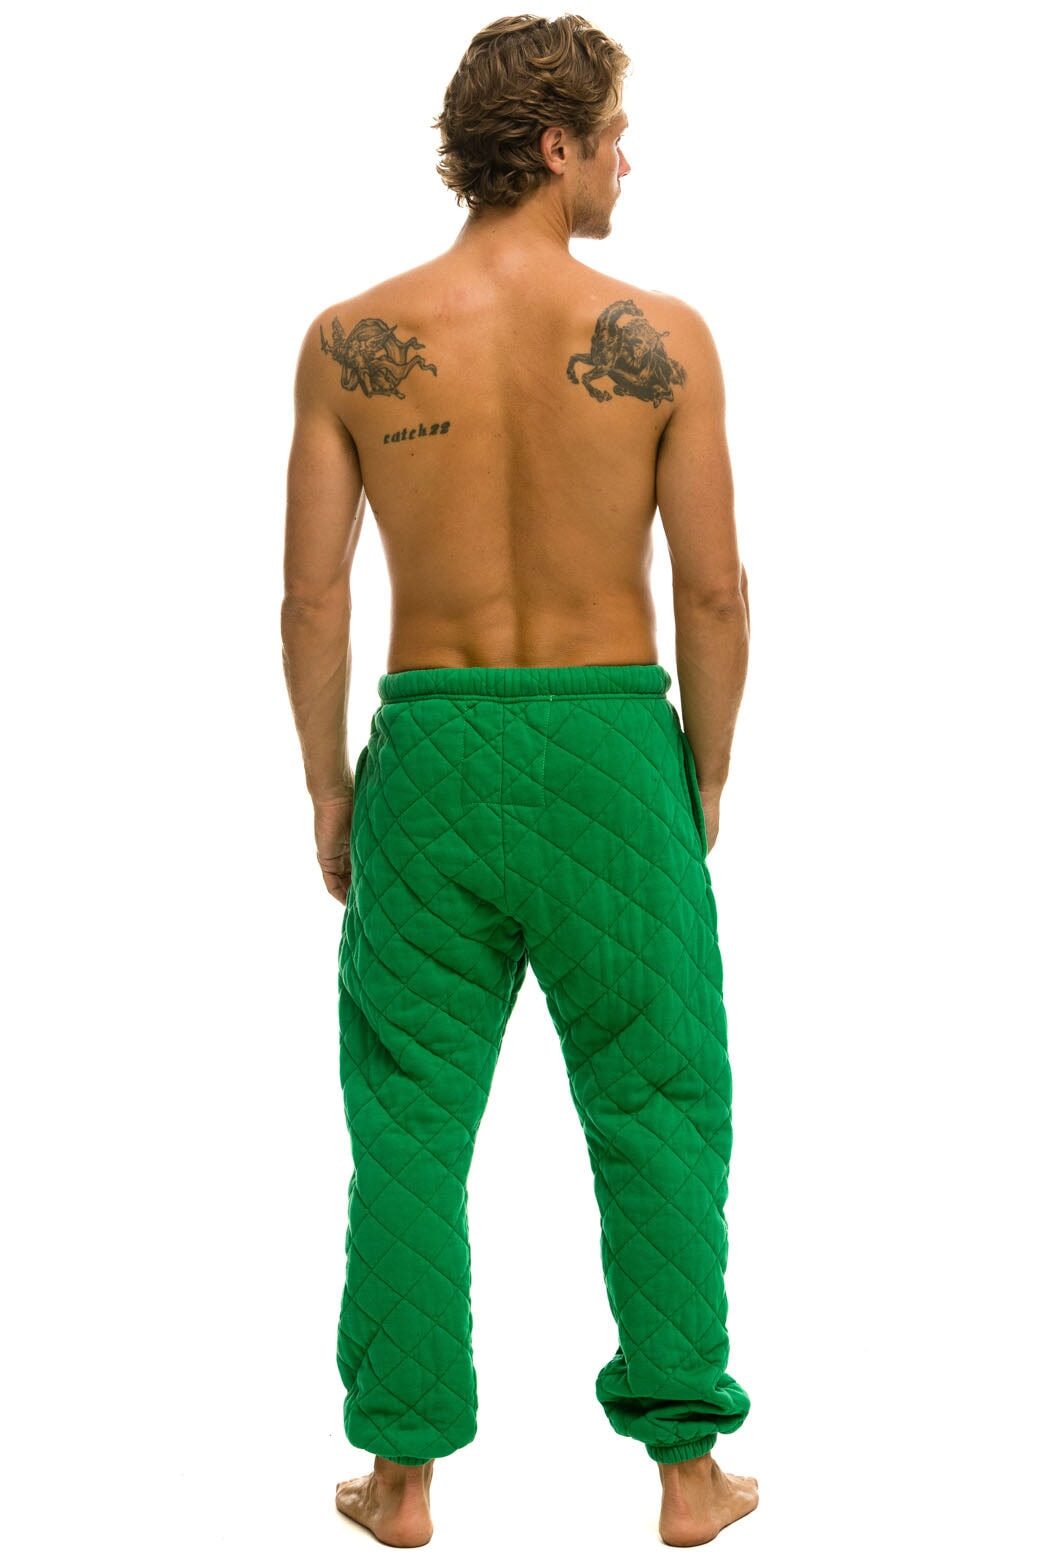 MEN'S QUILTED SWEATPANTS - KELLY GREEN Mens Sweatpants Aviator Nation 